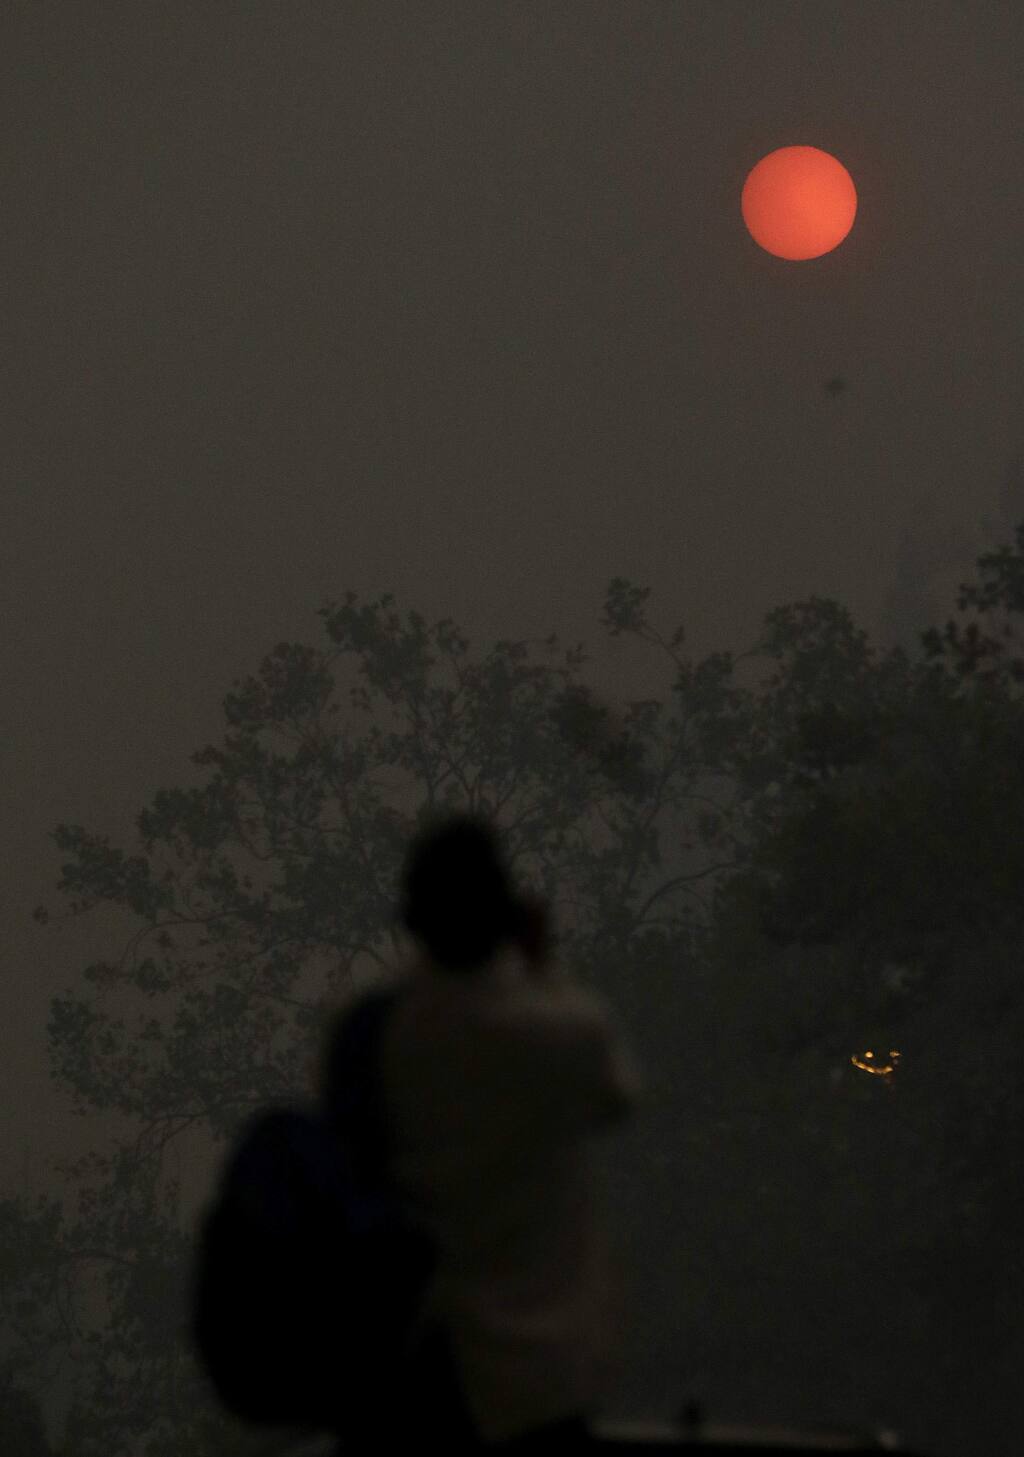 A woman takes a photo of the sun covered from smoke and haze from fires in Santa Rosa, Calif., Monday, Oct. 9, 2017. Wildfires whipped by powerful winds swept through Northern California early Monday, sending residents on a headlong flight to safety through smoke and flames as homes burned. (AP Photo/Jeff Chiu)